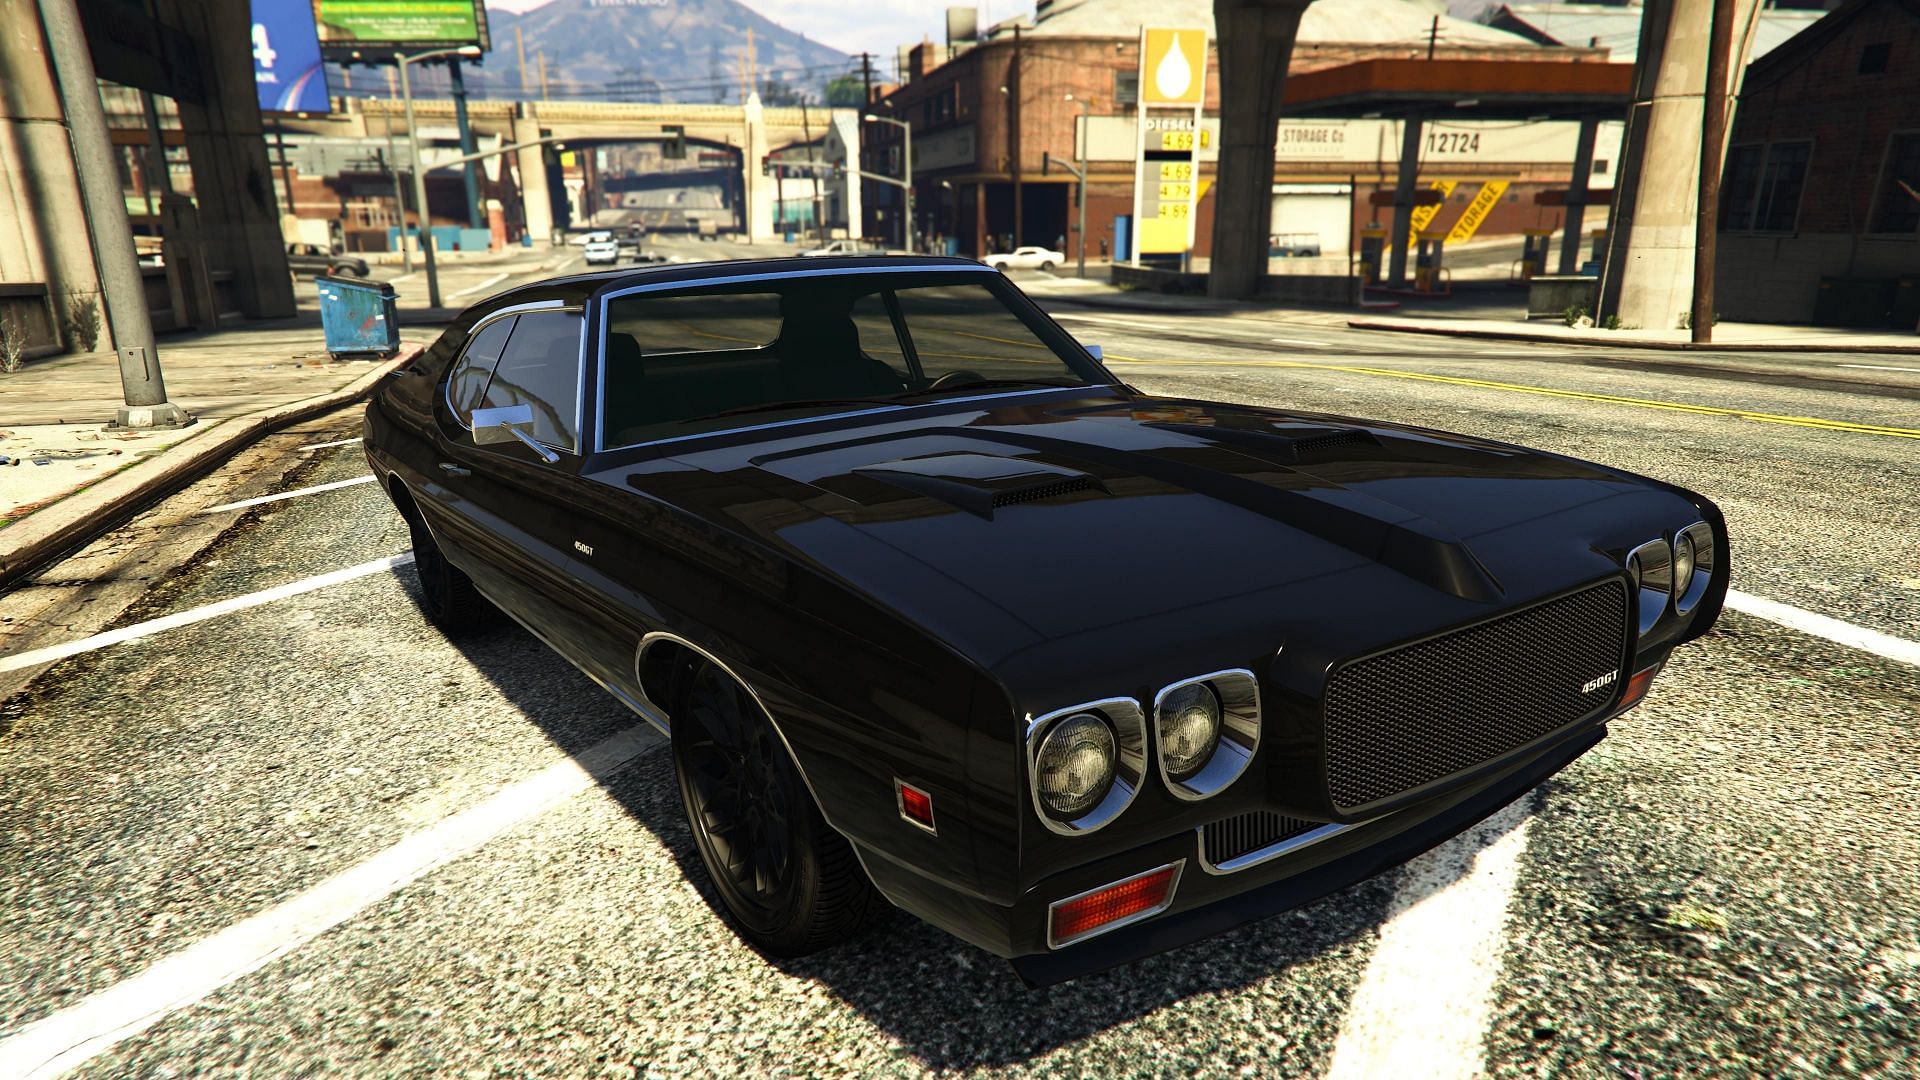 The Imponte Arbiter GT is the fastest muscle car in GTA Online (Image via GTAforums)